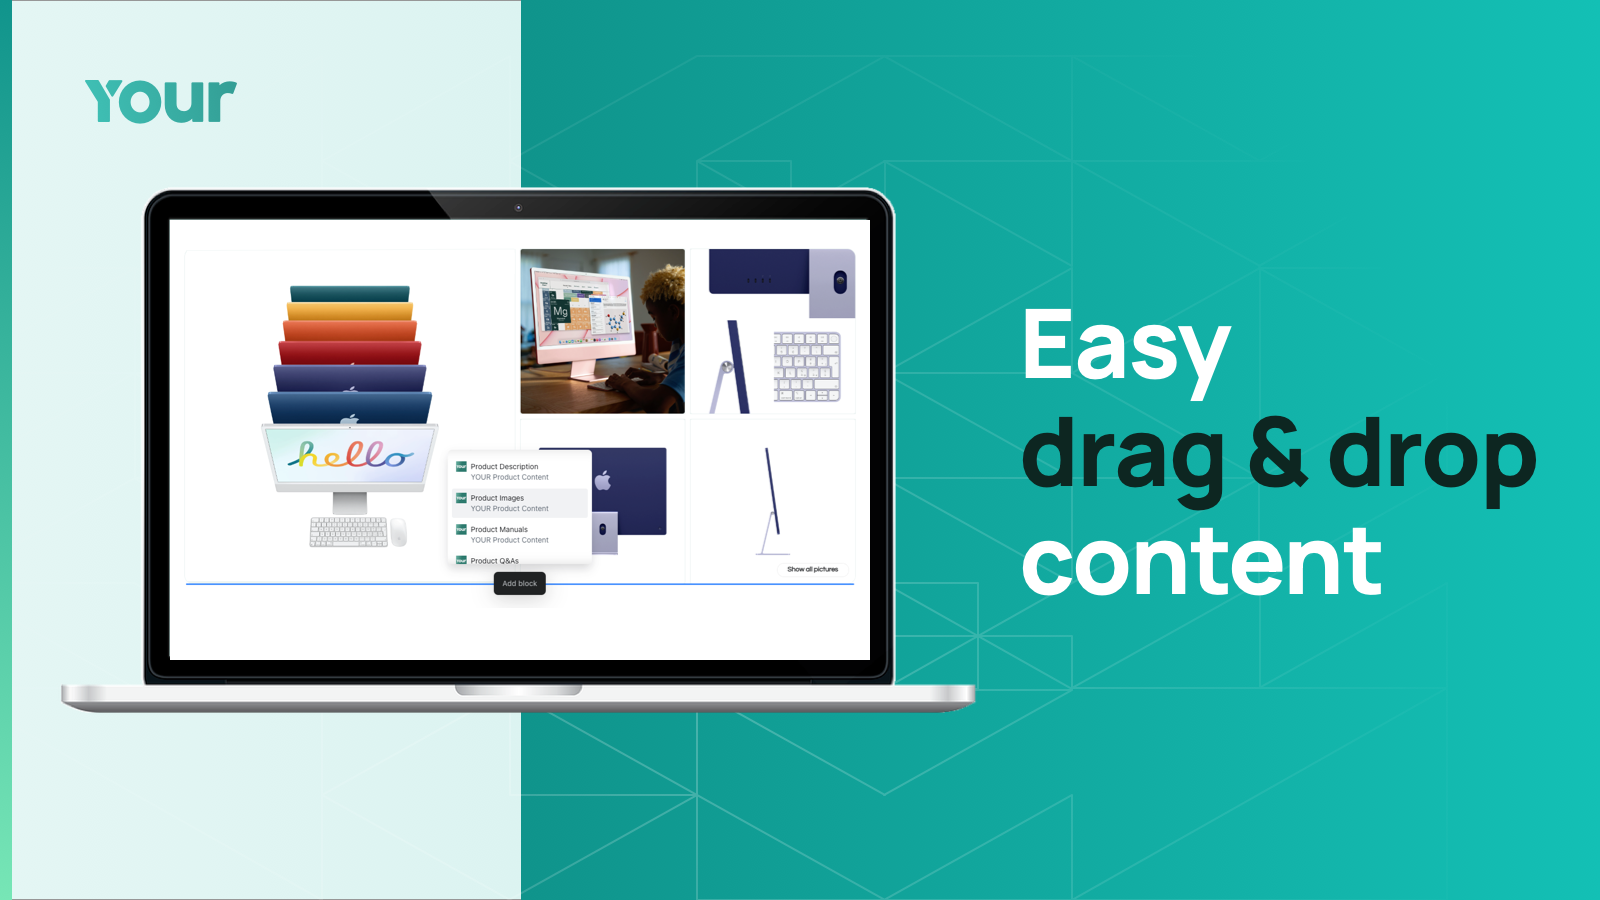 Drag and drop product content such as product images and videos